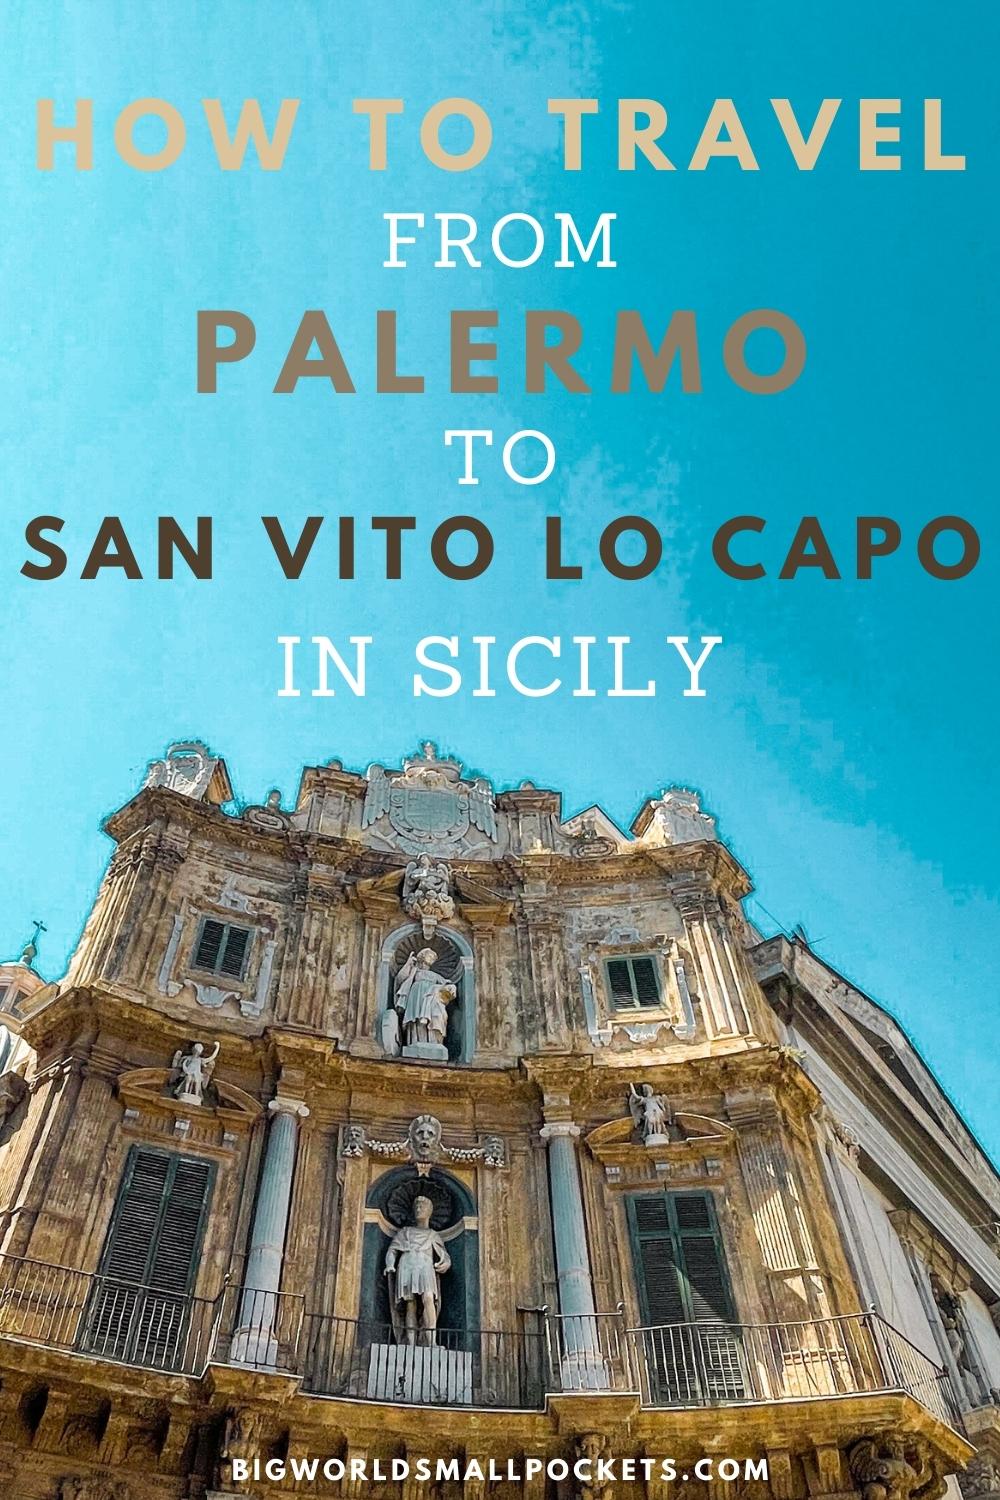 How to Travel from Palermo to San Vito lo Capo in Sicily